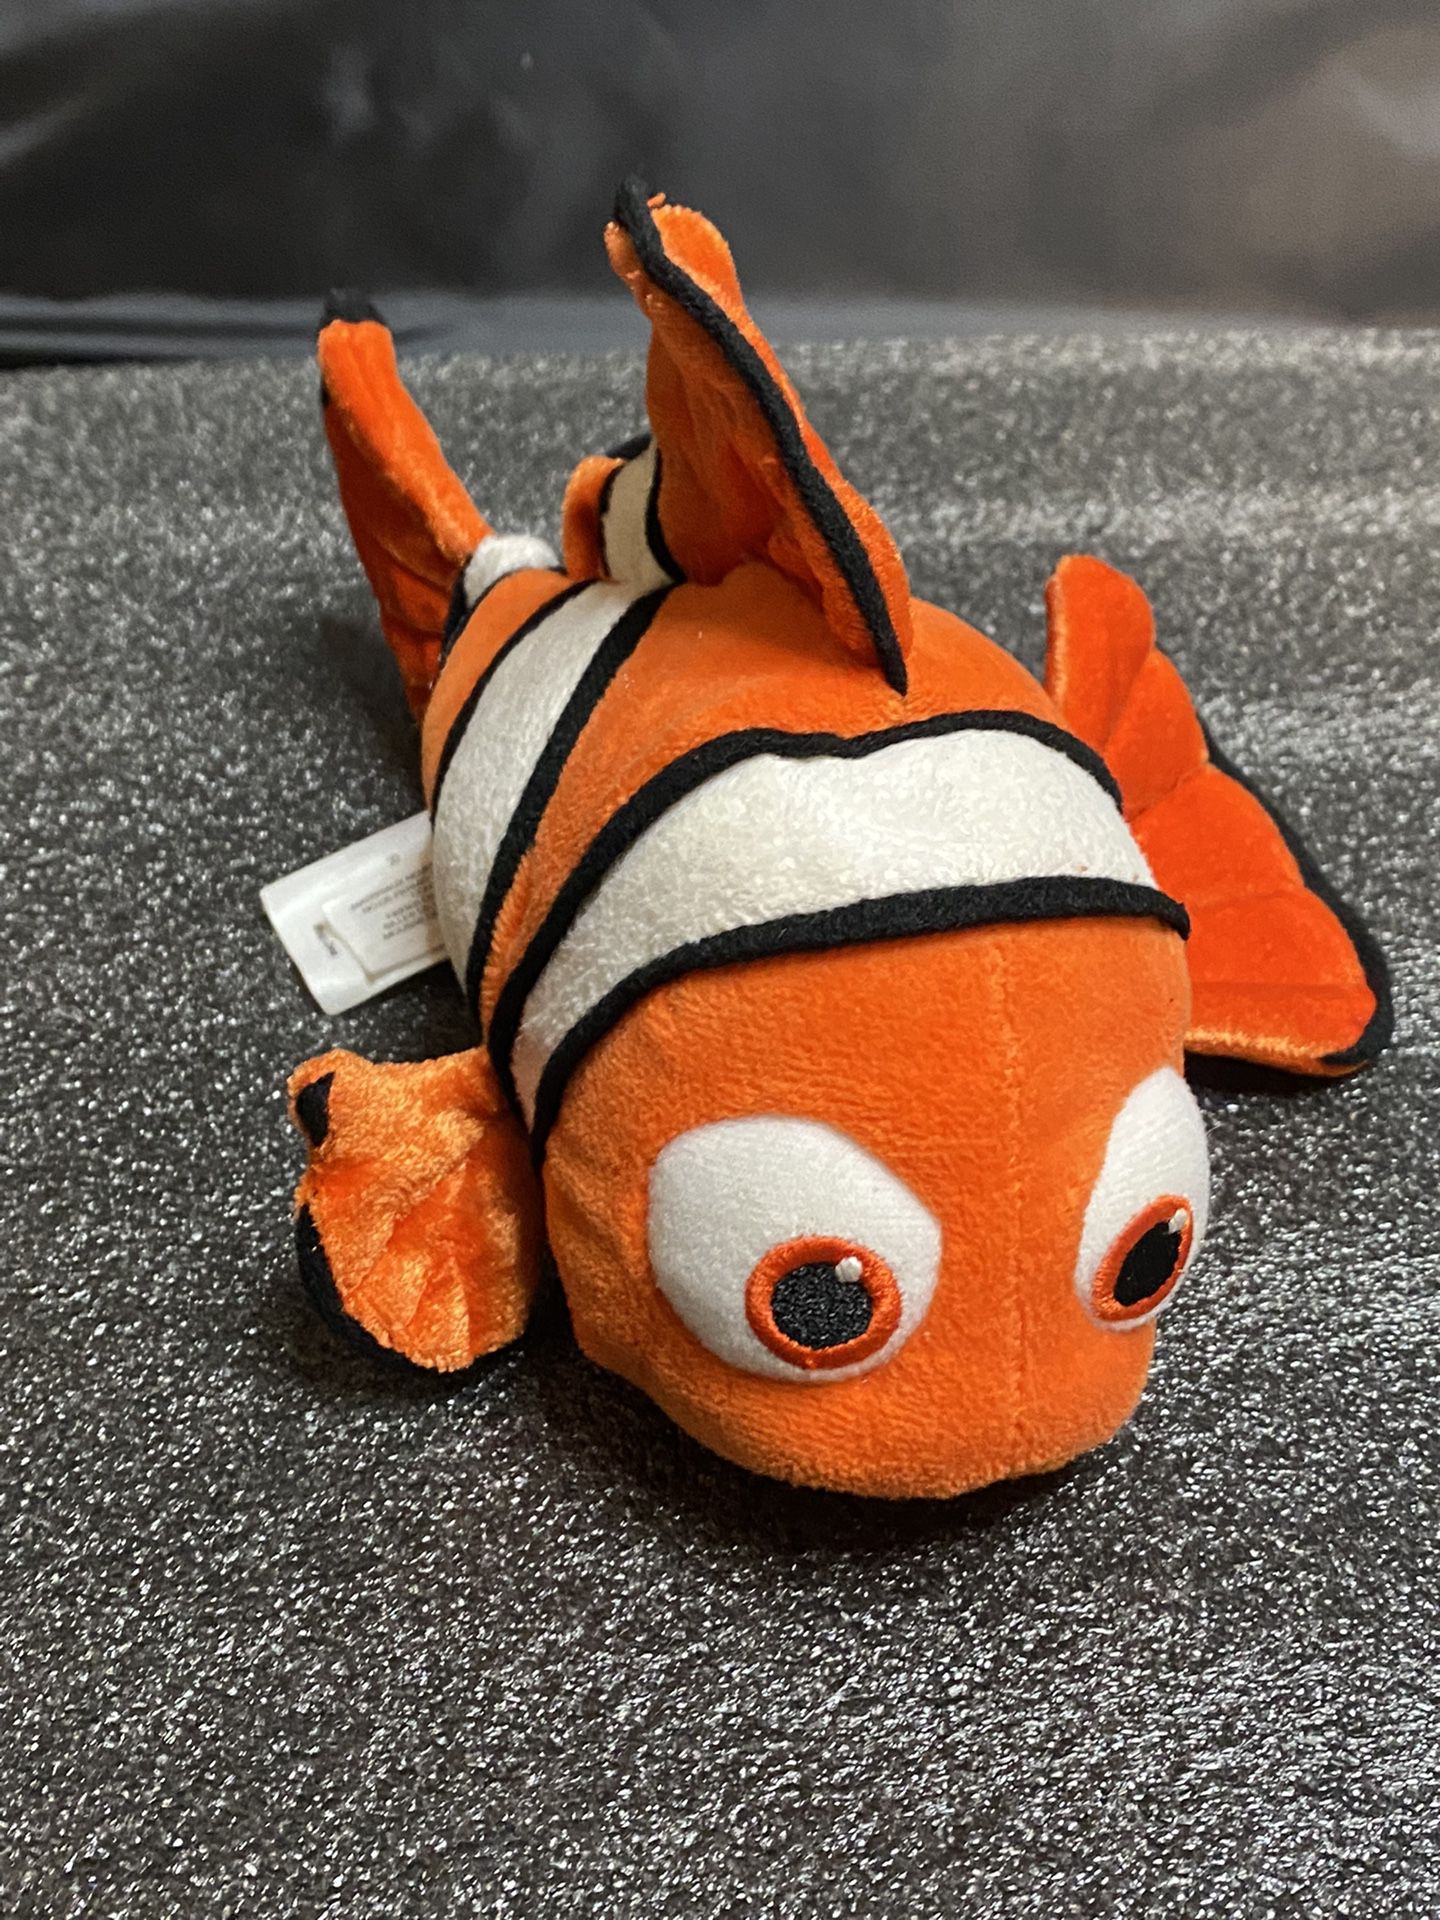 Nemo plush doll from Finding Nemo. 9” in height